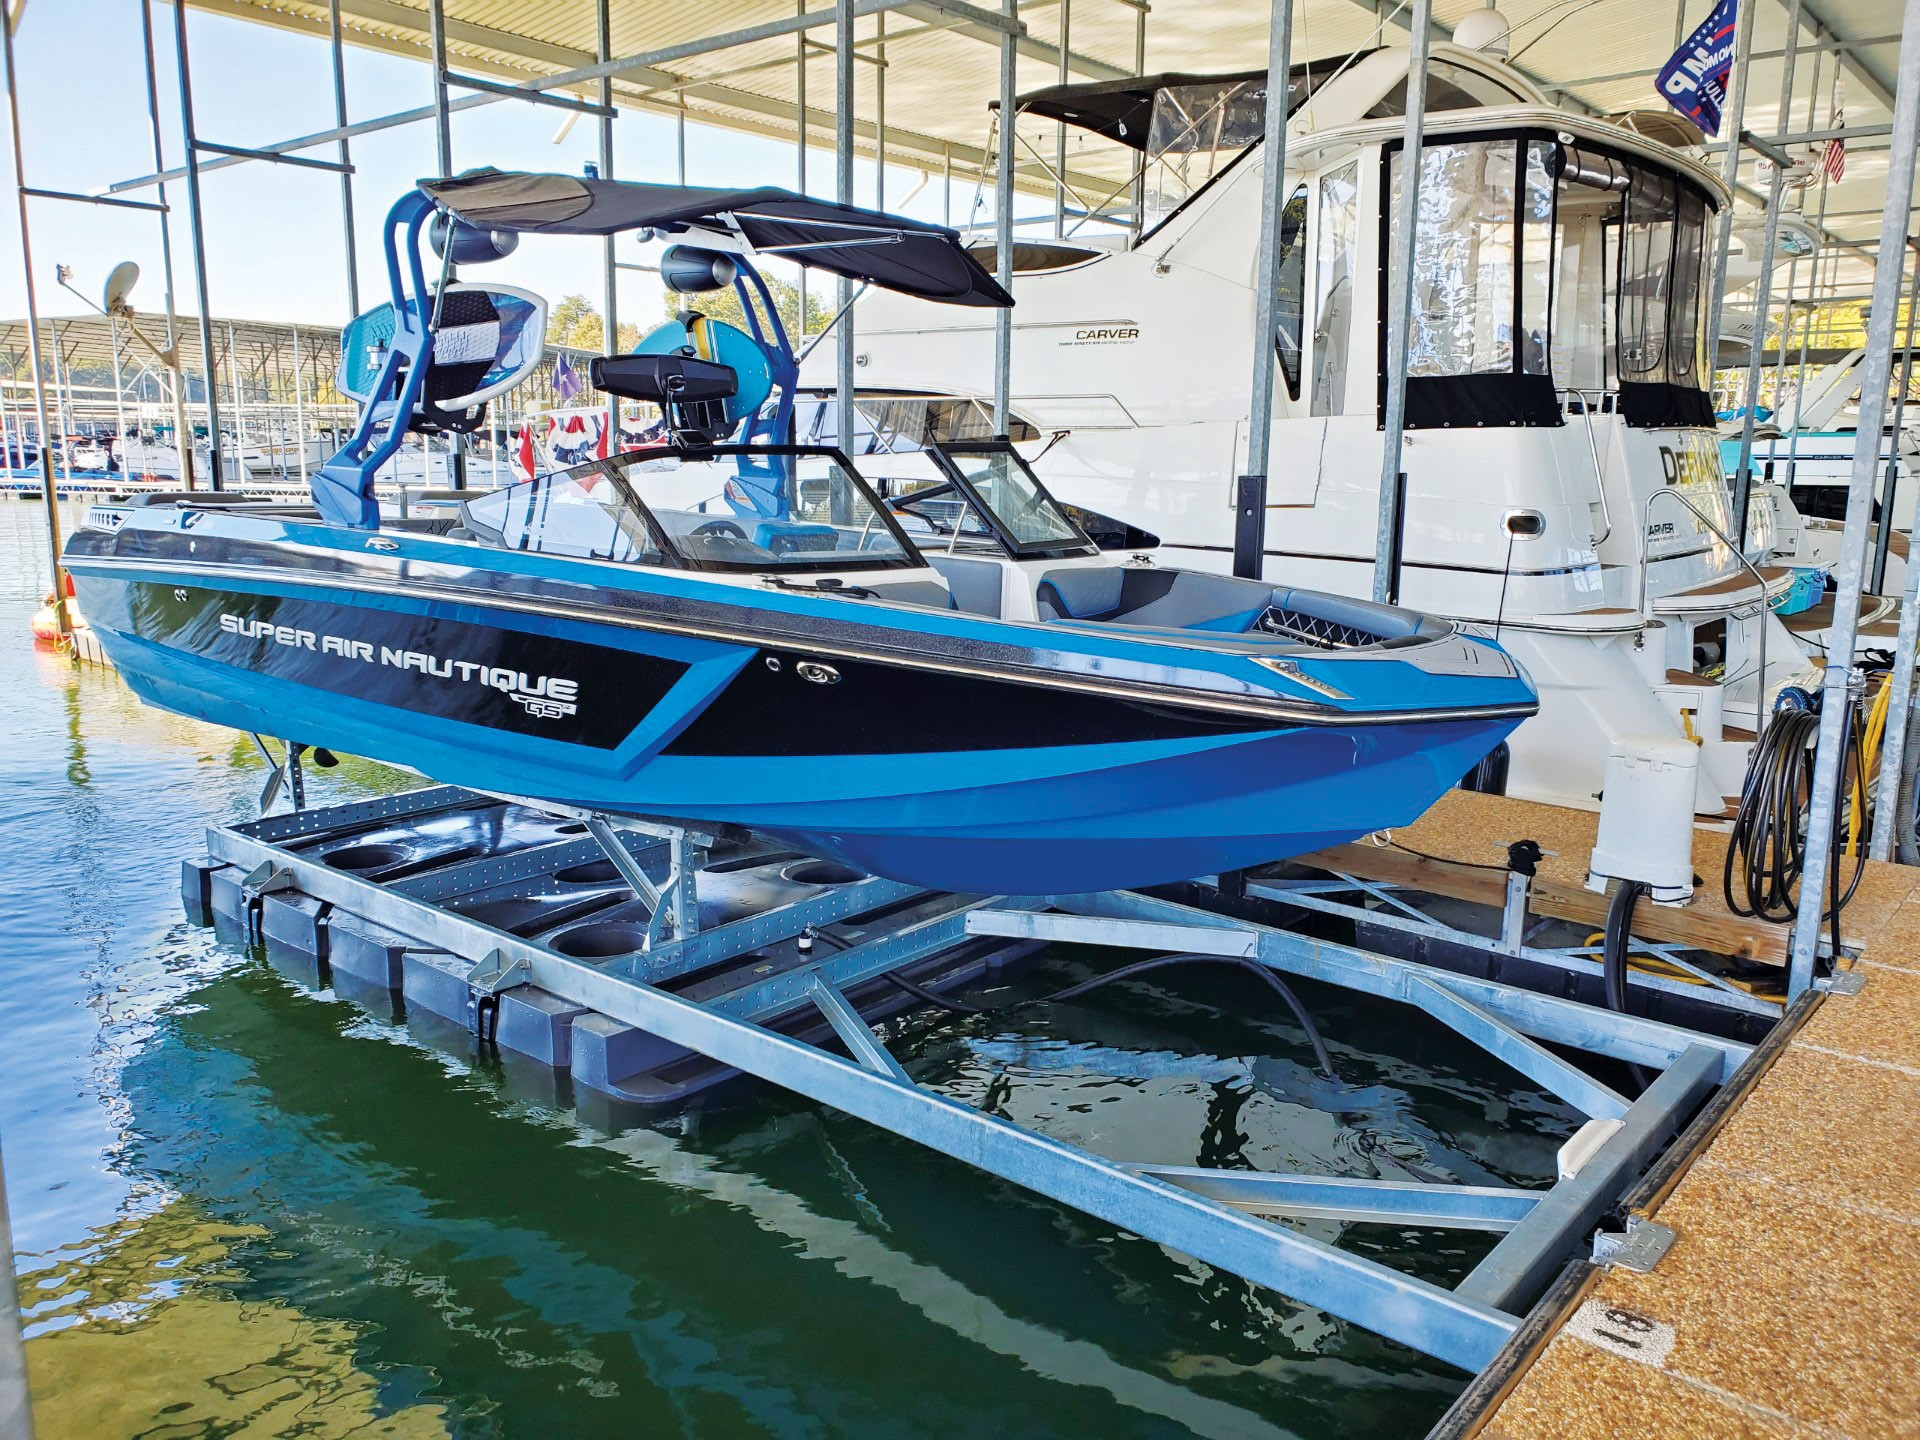 Fun Boat Accessories: Take Your Summer Boating to the Next Level